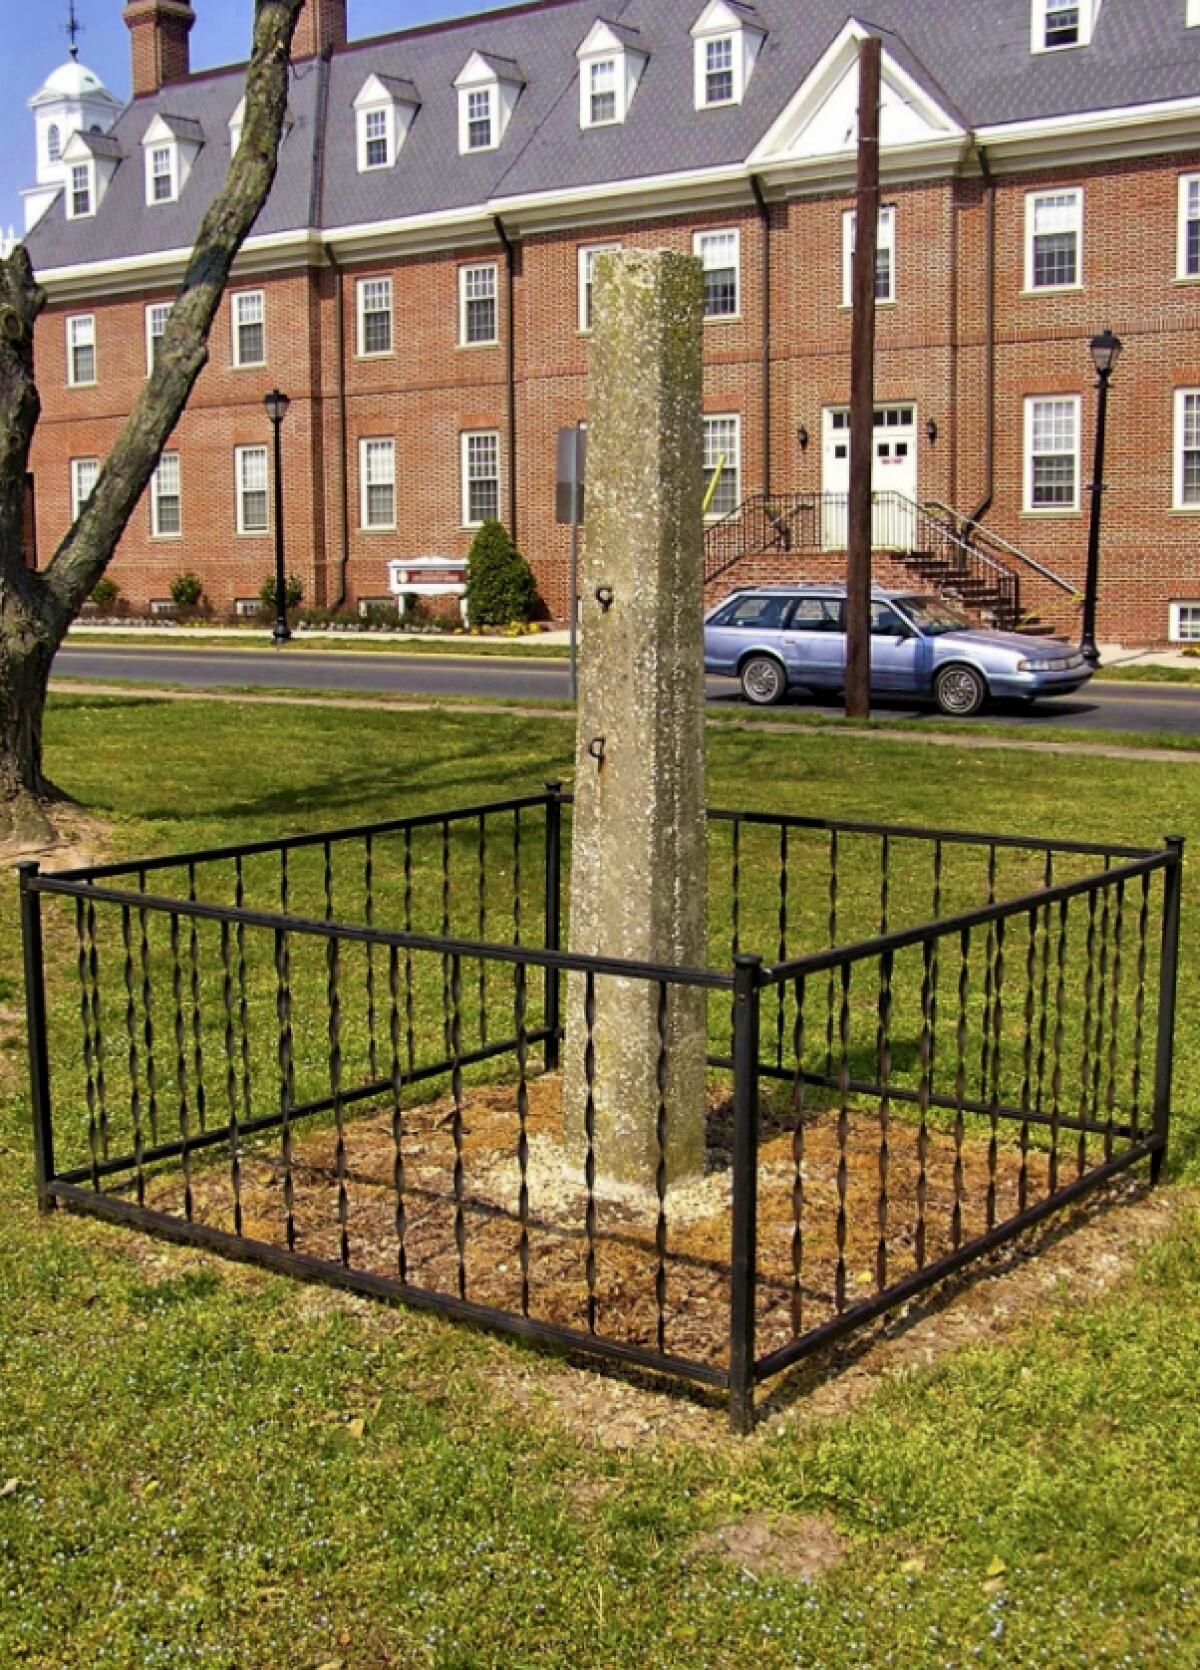 A whipping post on the grounds of the Old Sussex County Courthouse in Georgetown, Del.